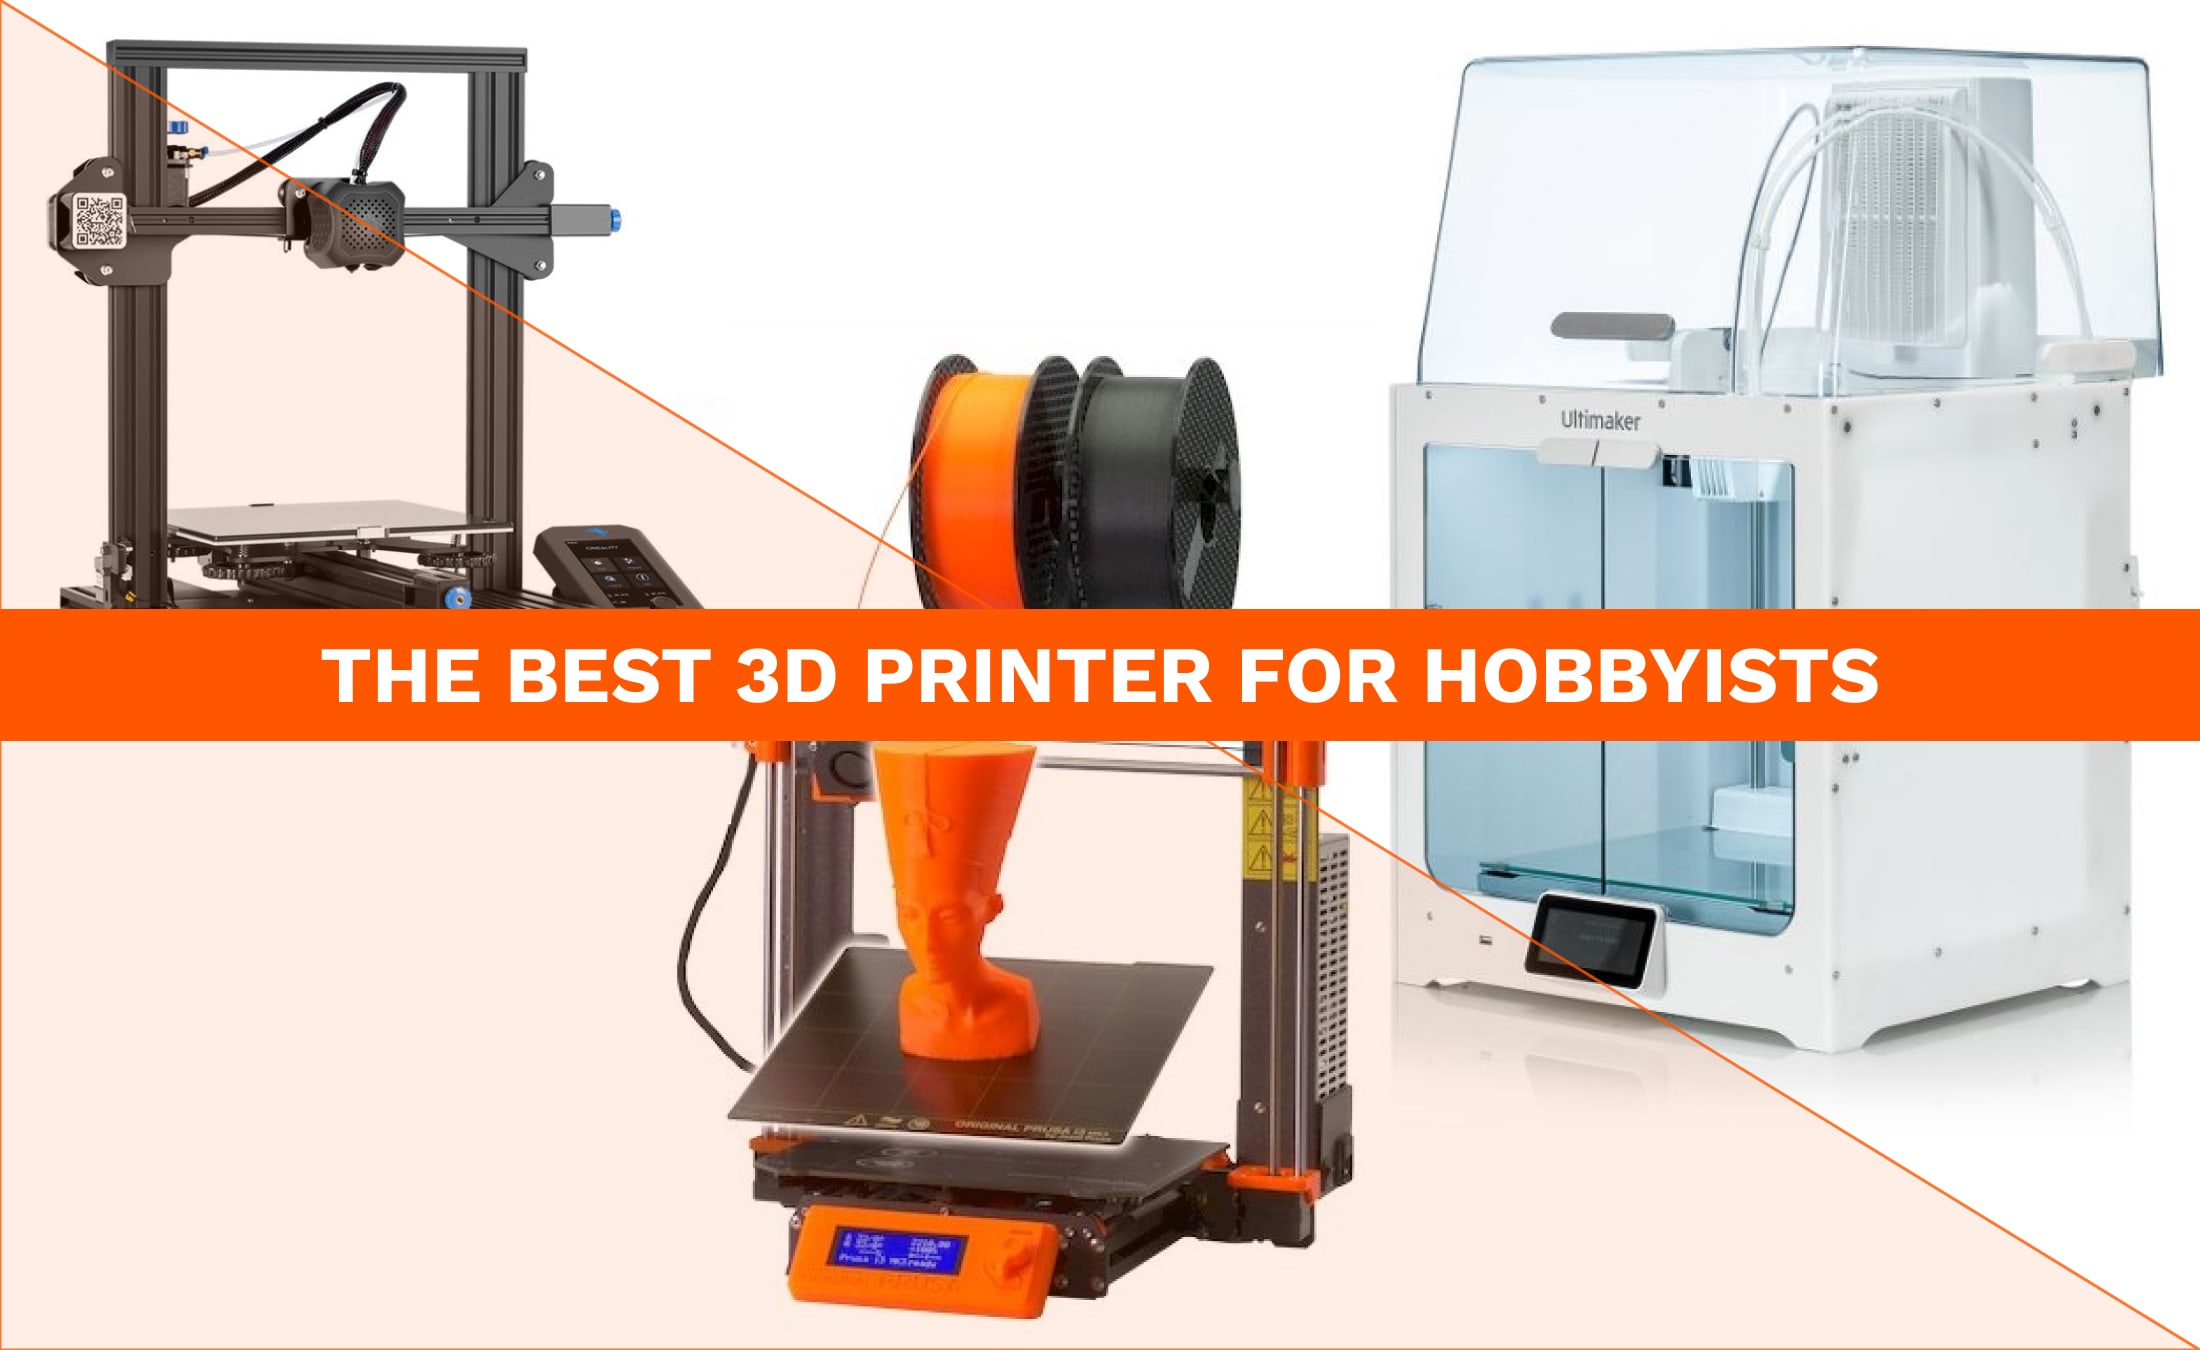 Kevin’s Take: The Best 3D Printer for Hobbyists